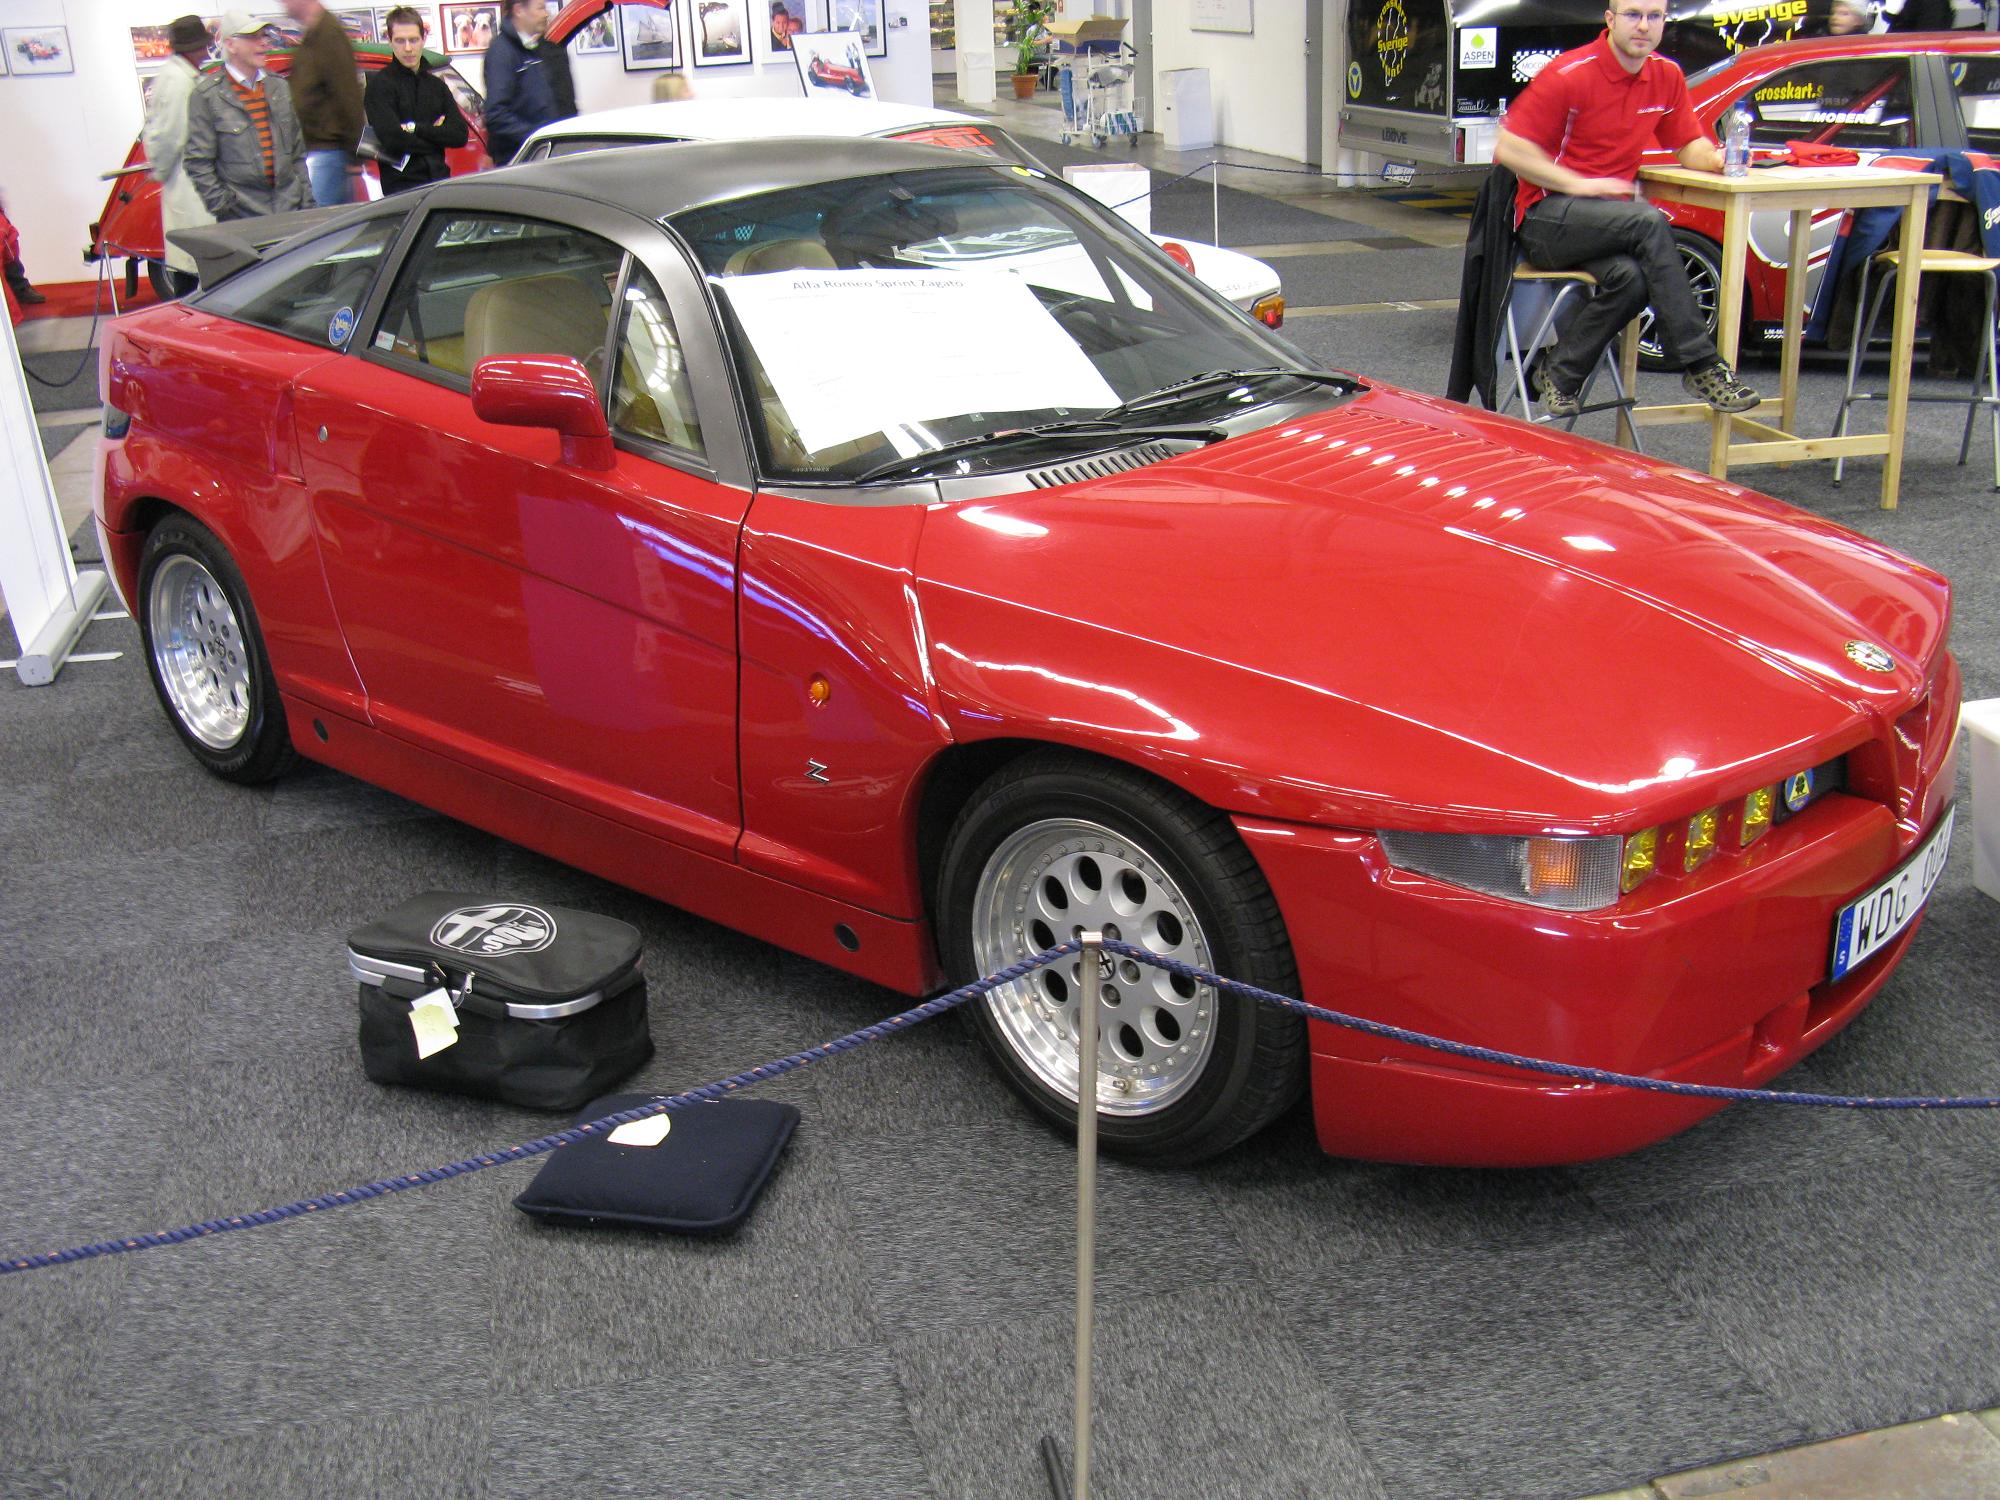 red sports car with white interior parked near a table